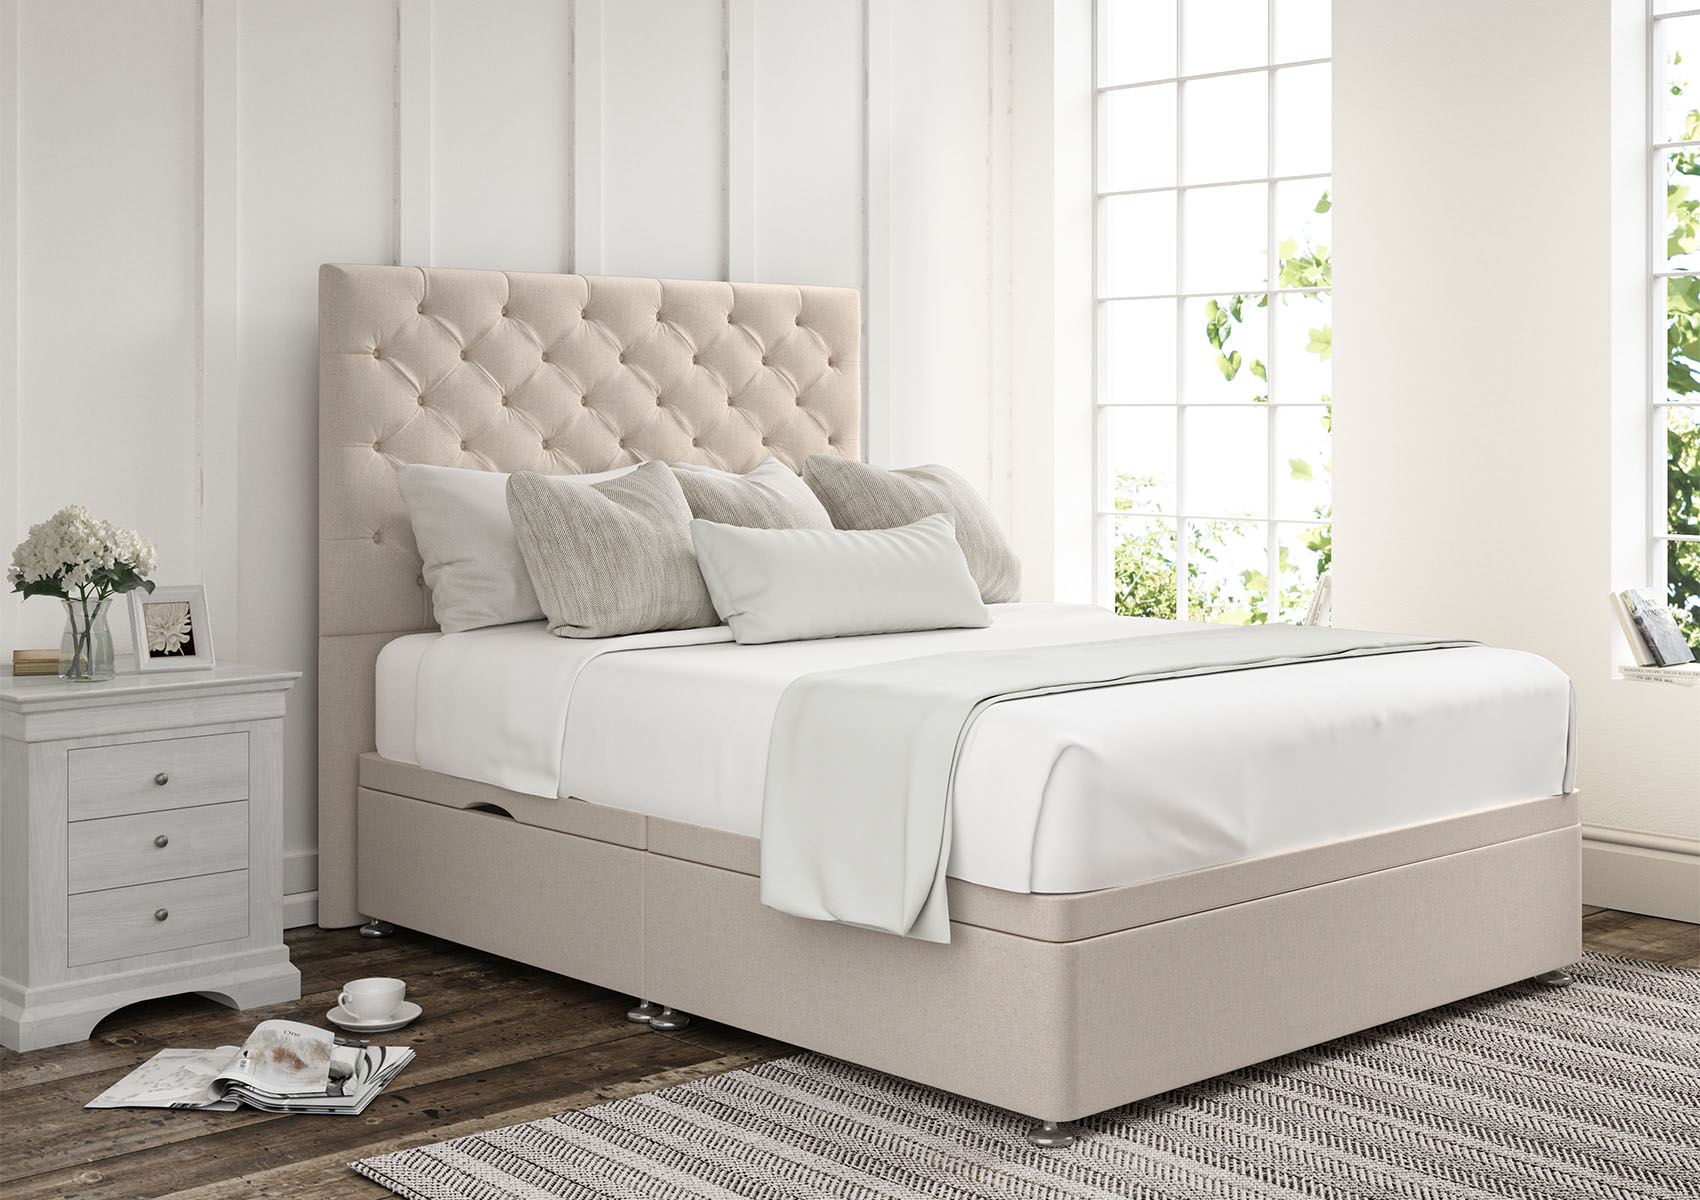 View Chesterfield Teddy Cream Upholstered Single Ottoman Bed Time4Sleep information